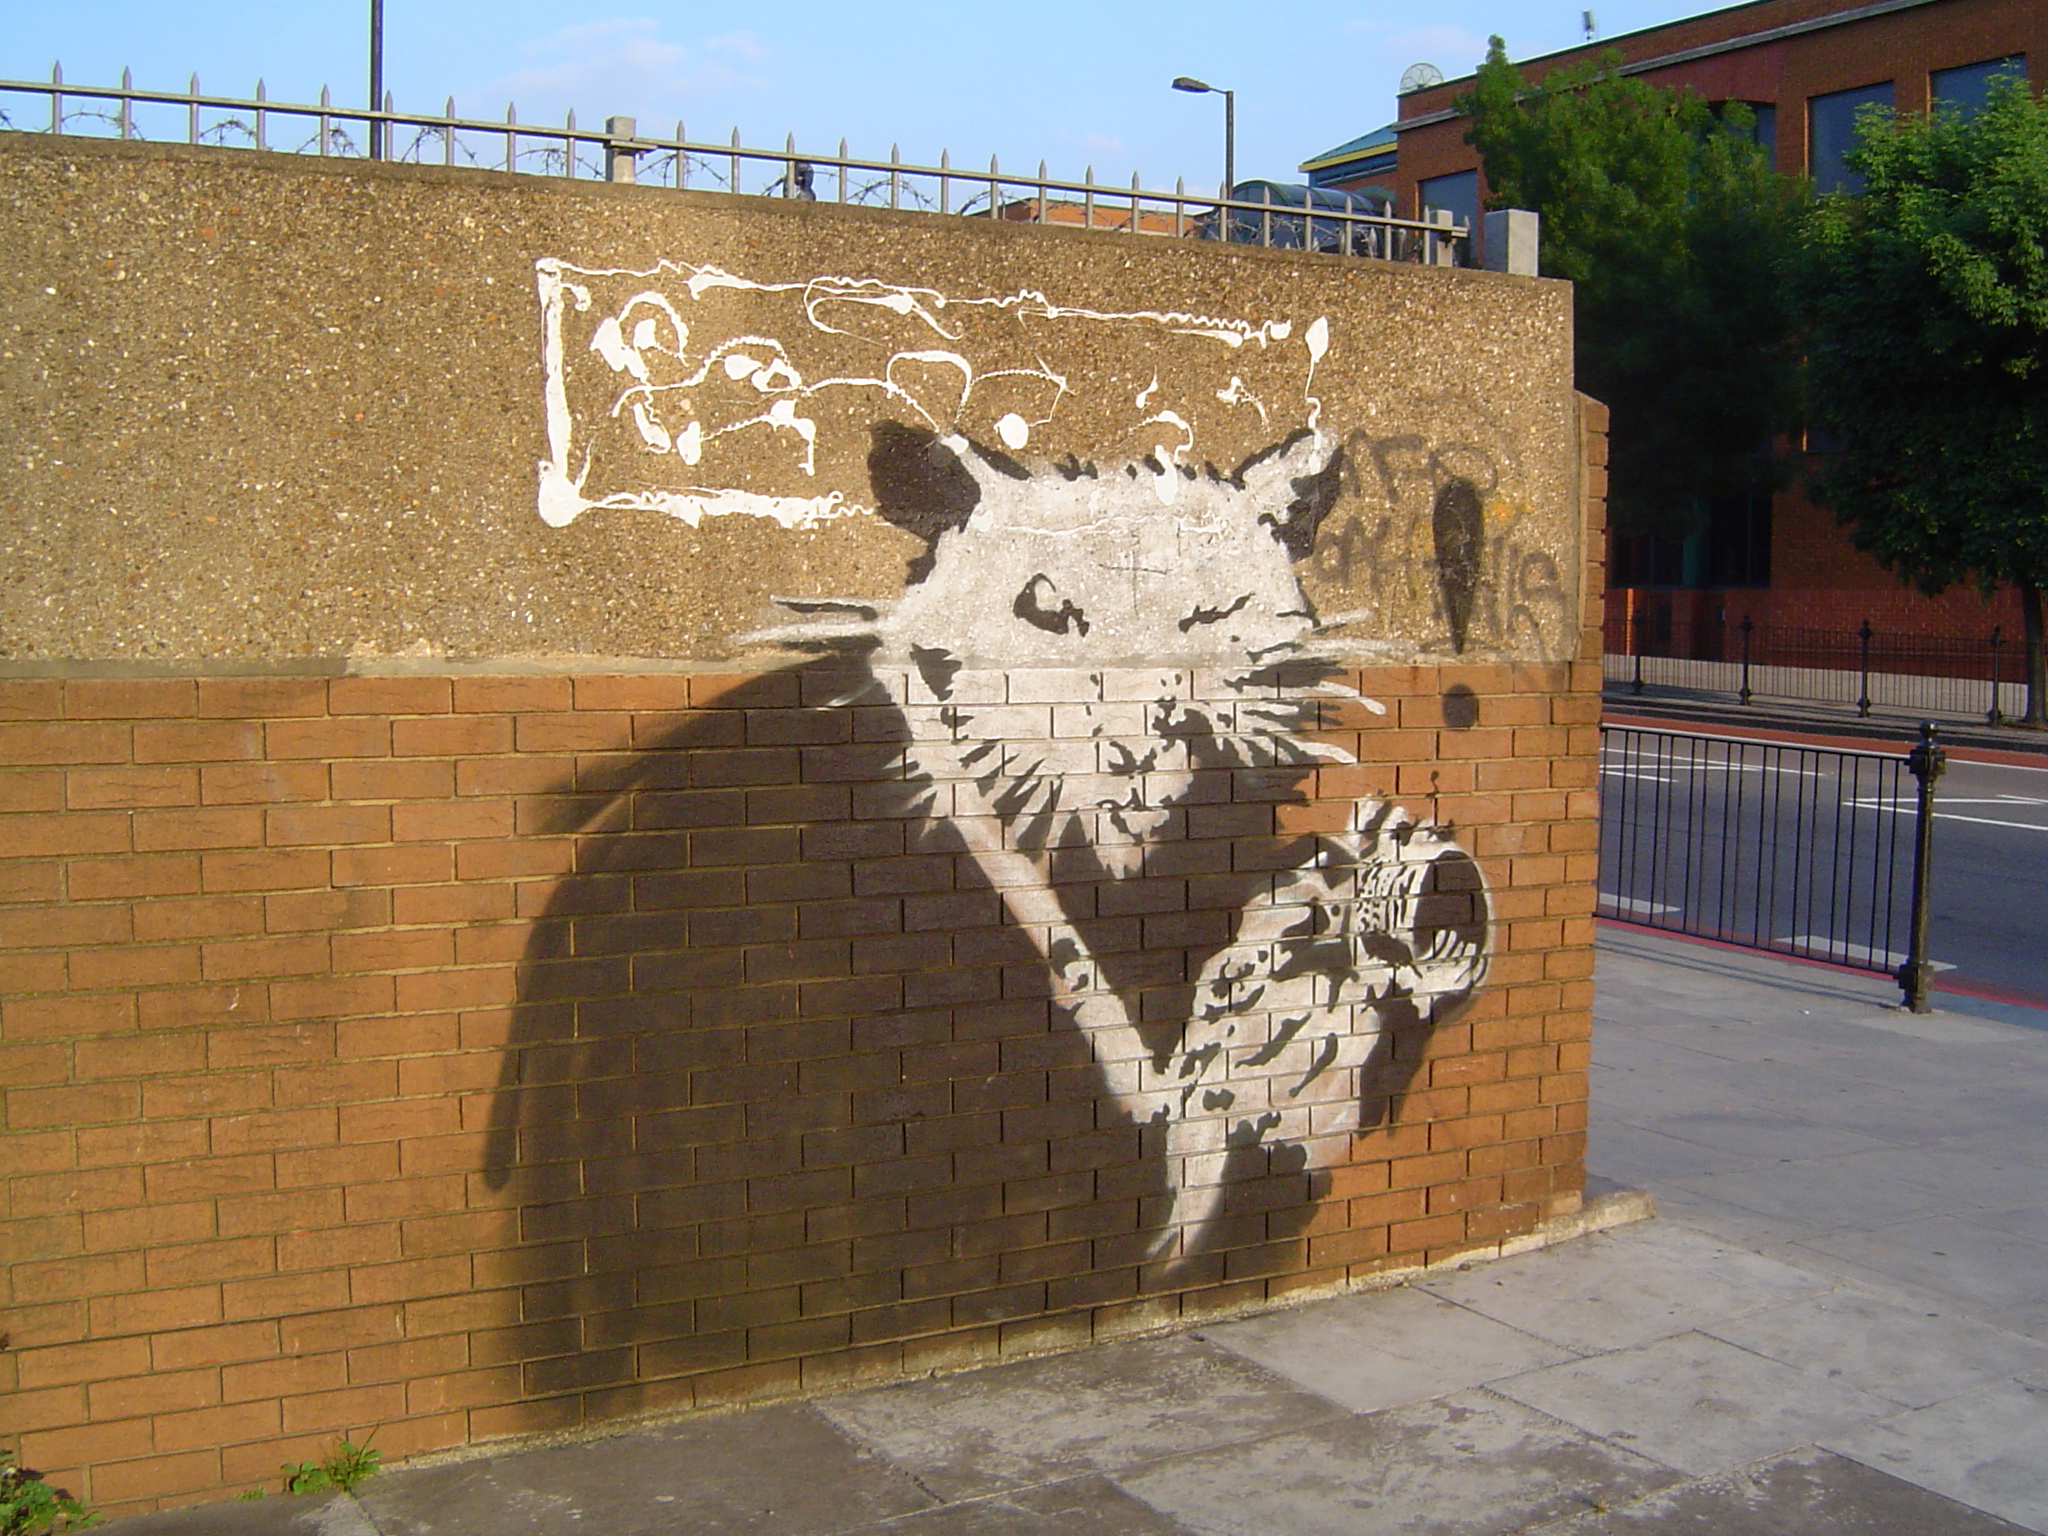 „The Rat (Graffiti in London)“. Lizenziert unter CC BY-SA 1.0 über Wikimedia Commons - https://commons.wikimedia.org/wiki/File:The_Rat_(Graffiti_in_London).jpg#/media/File:The_Rat_(Graffiti_in_London).jpg